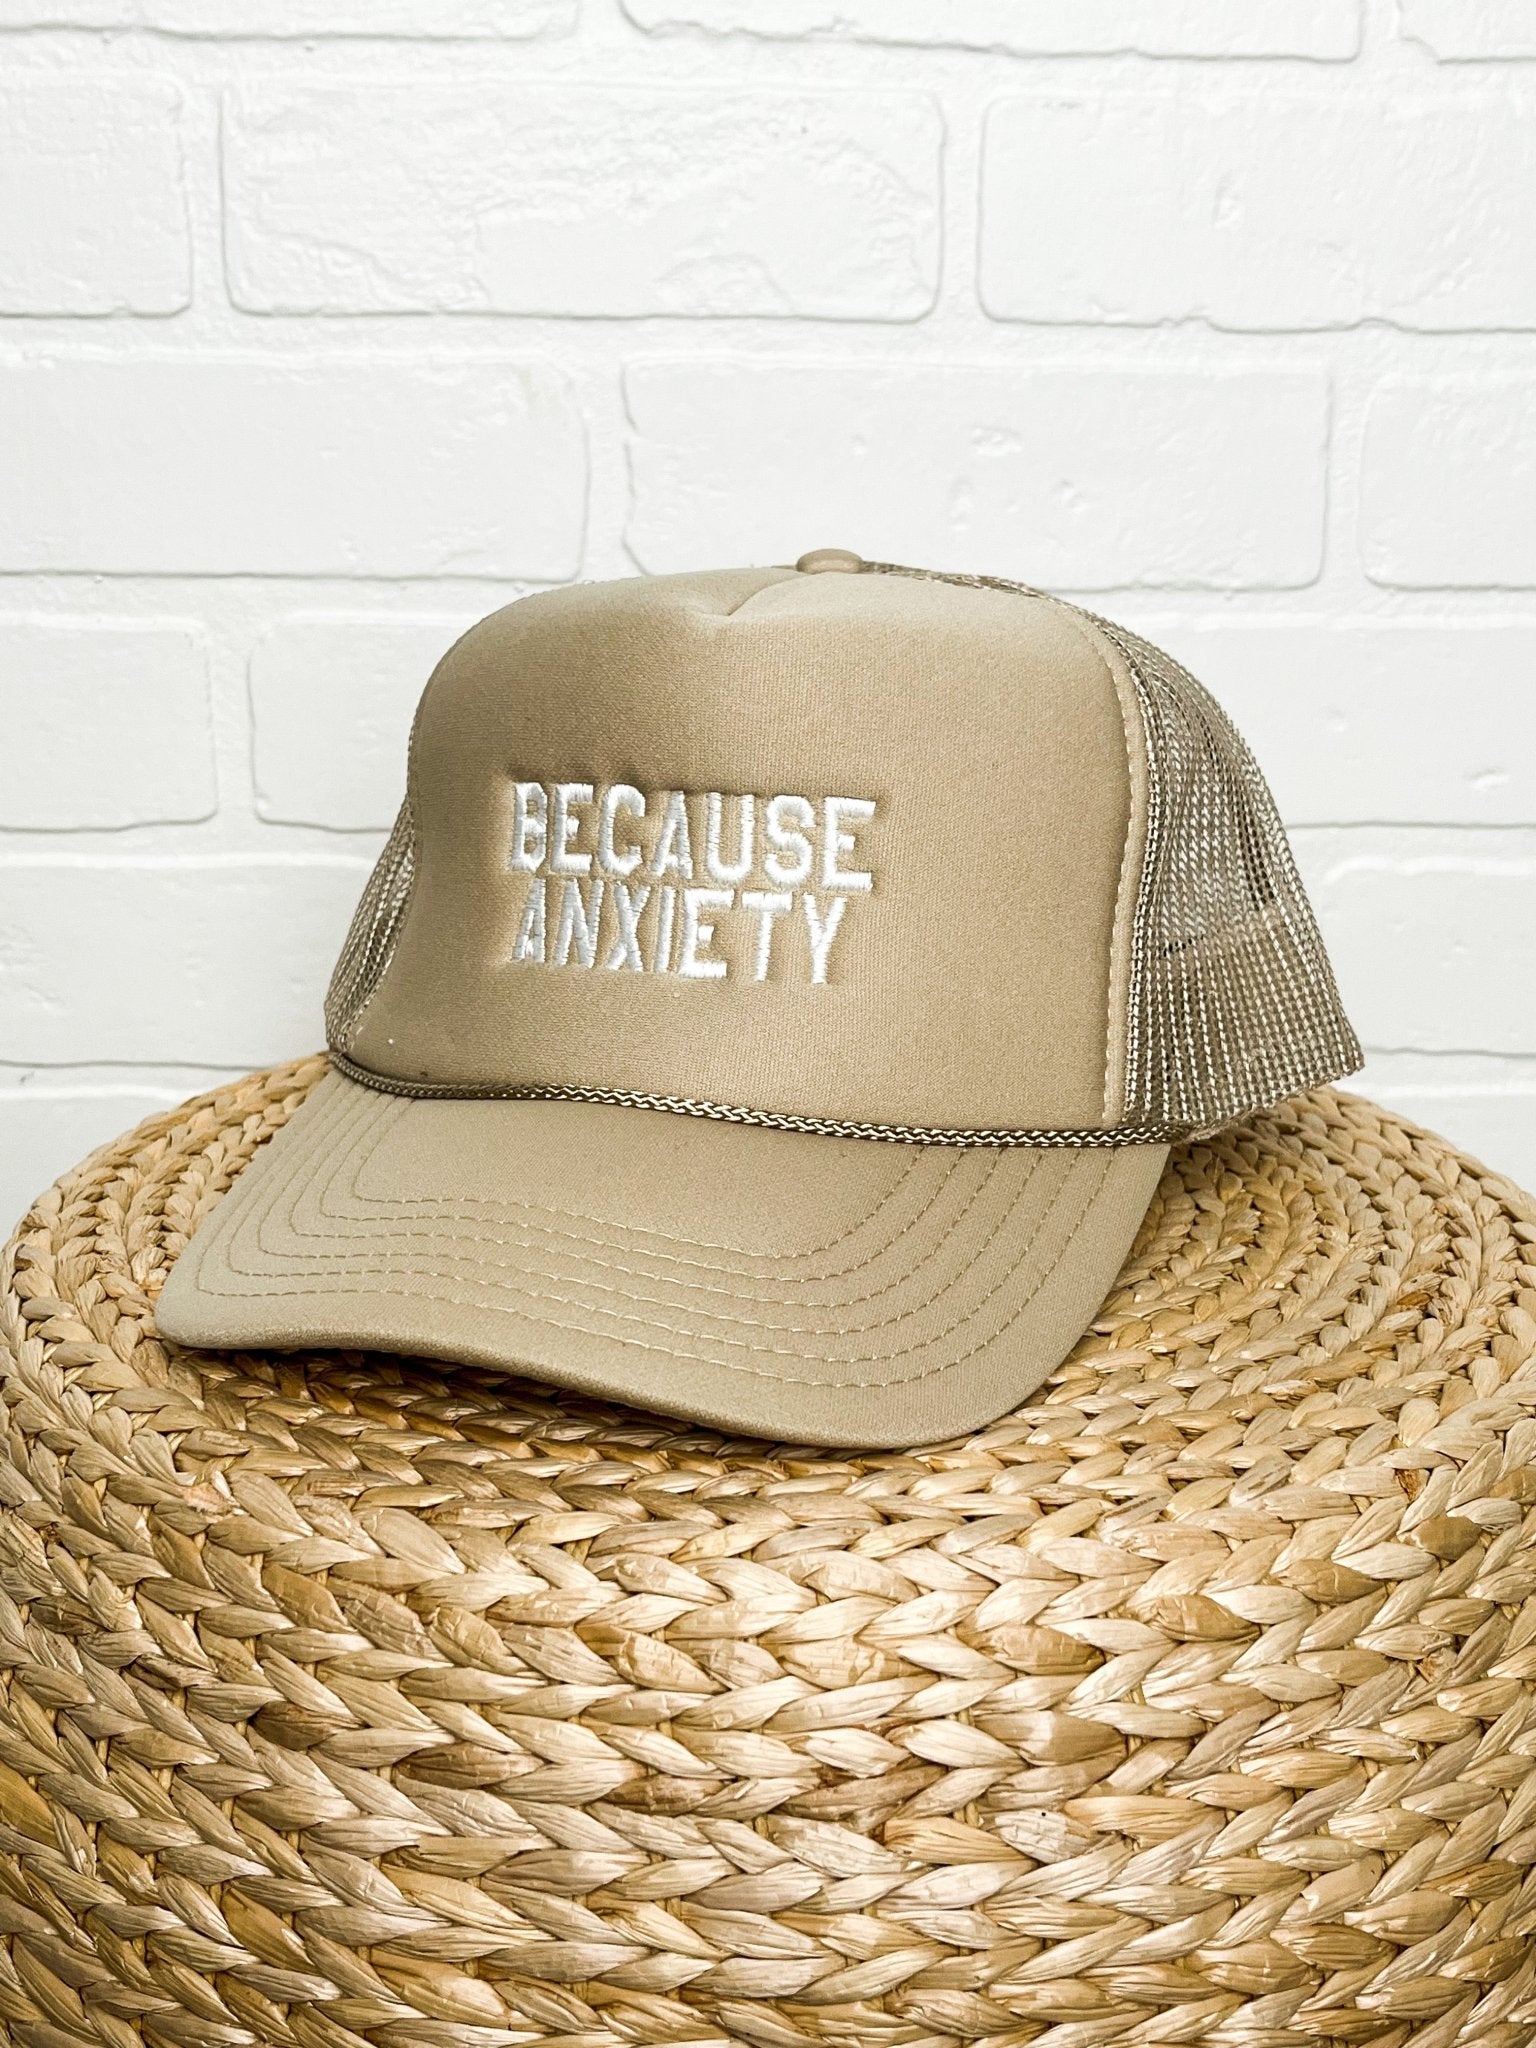 Because anxiety trucker hat khaki - Trendy Hats at Lush Fashion Lounge Boutique in Oklahoma City